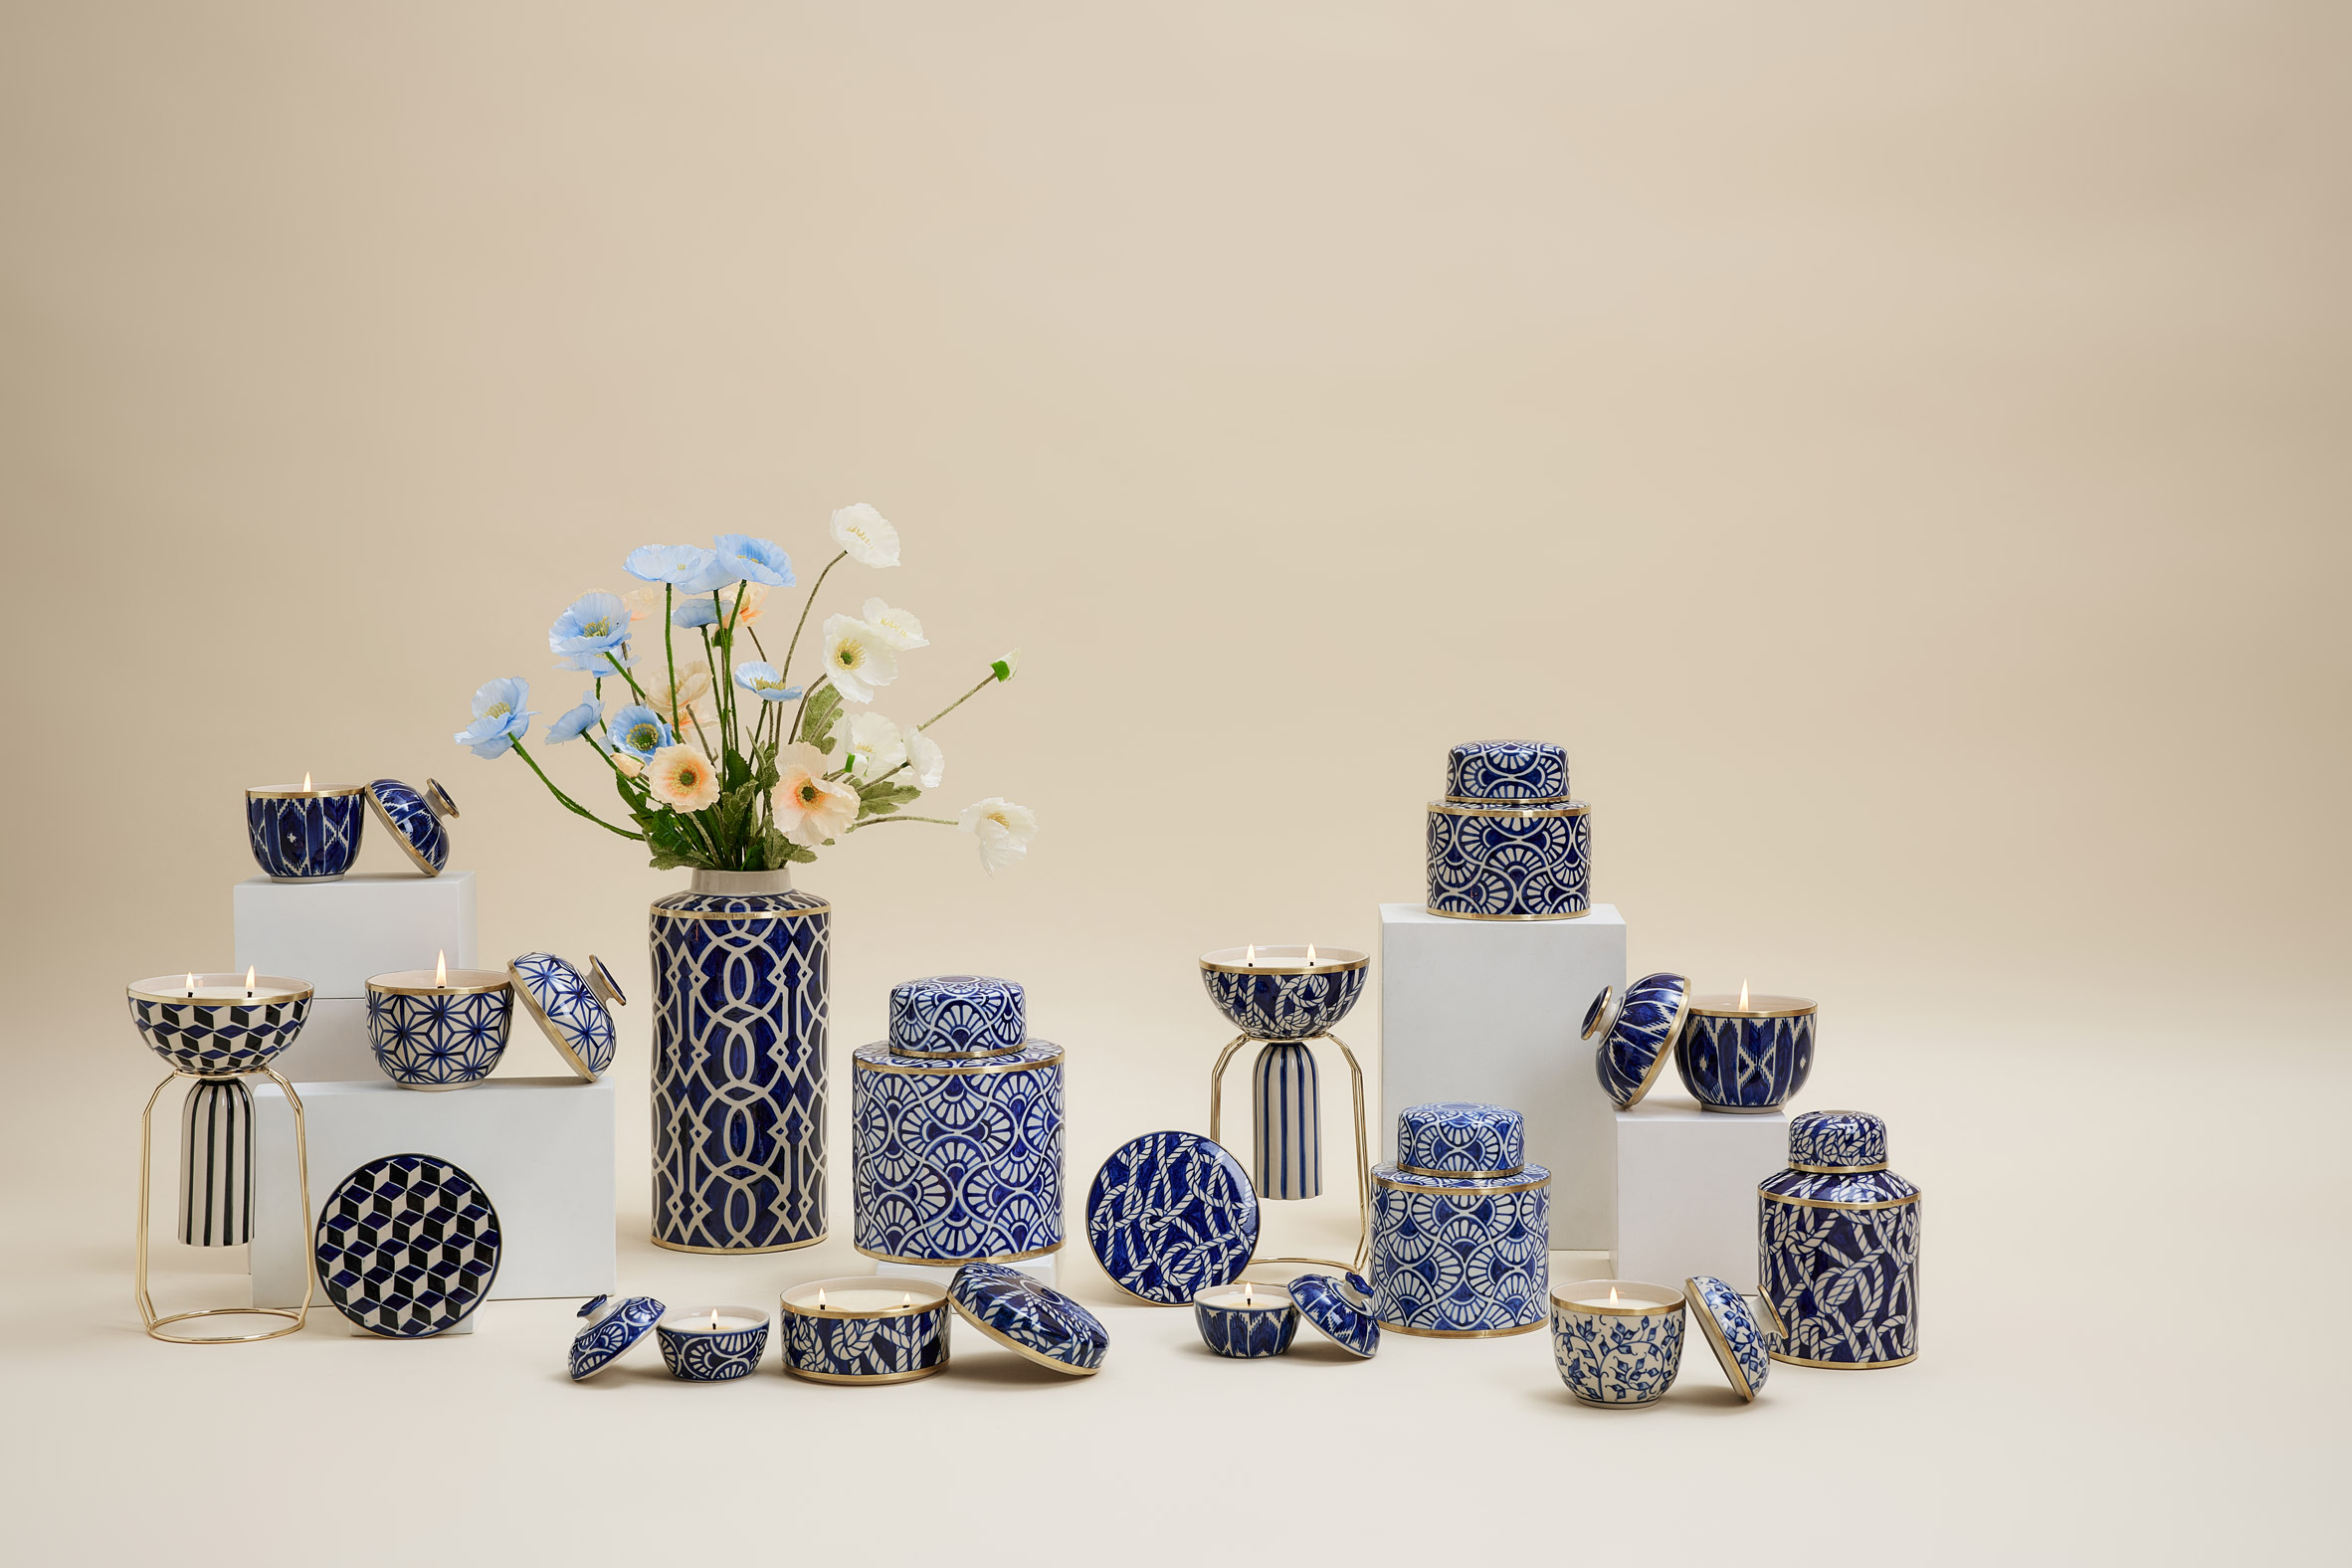 Blue and white china on beige backdrop